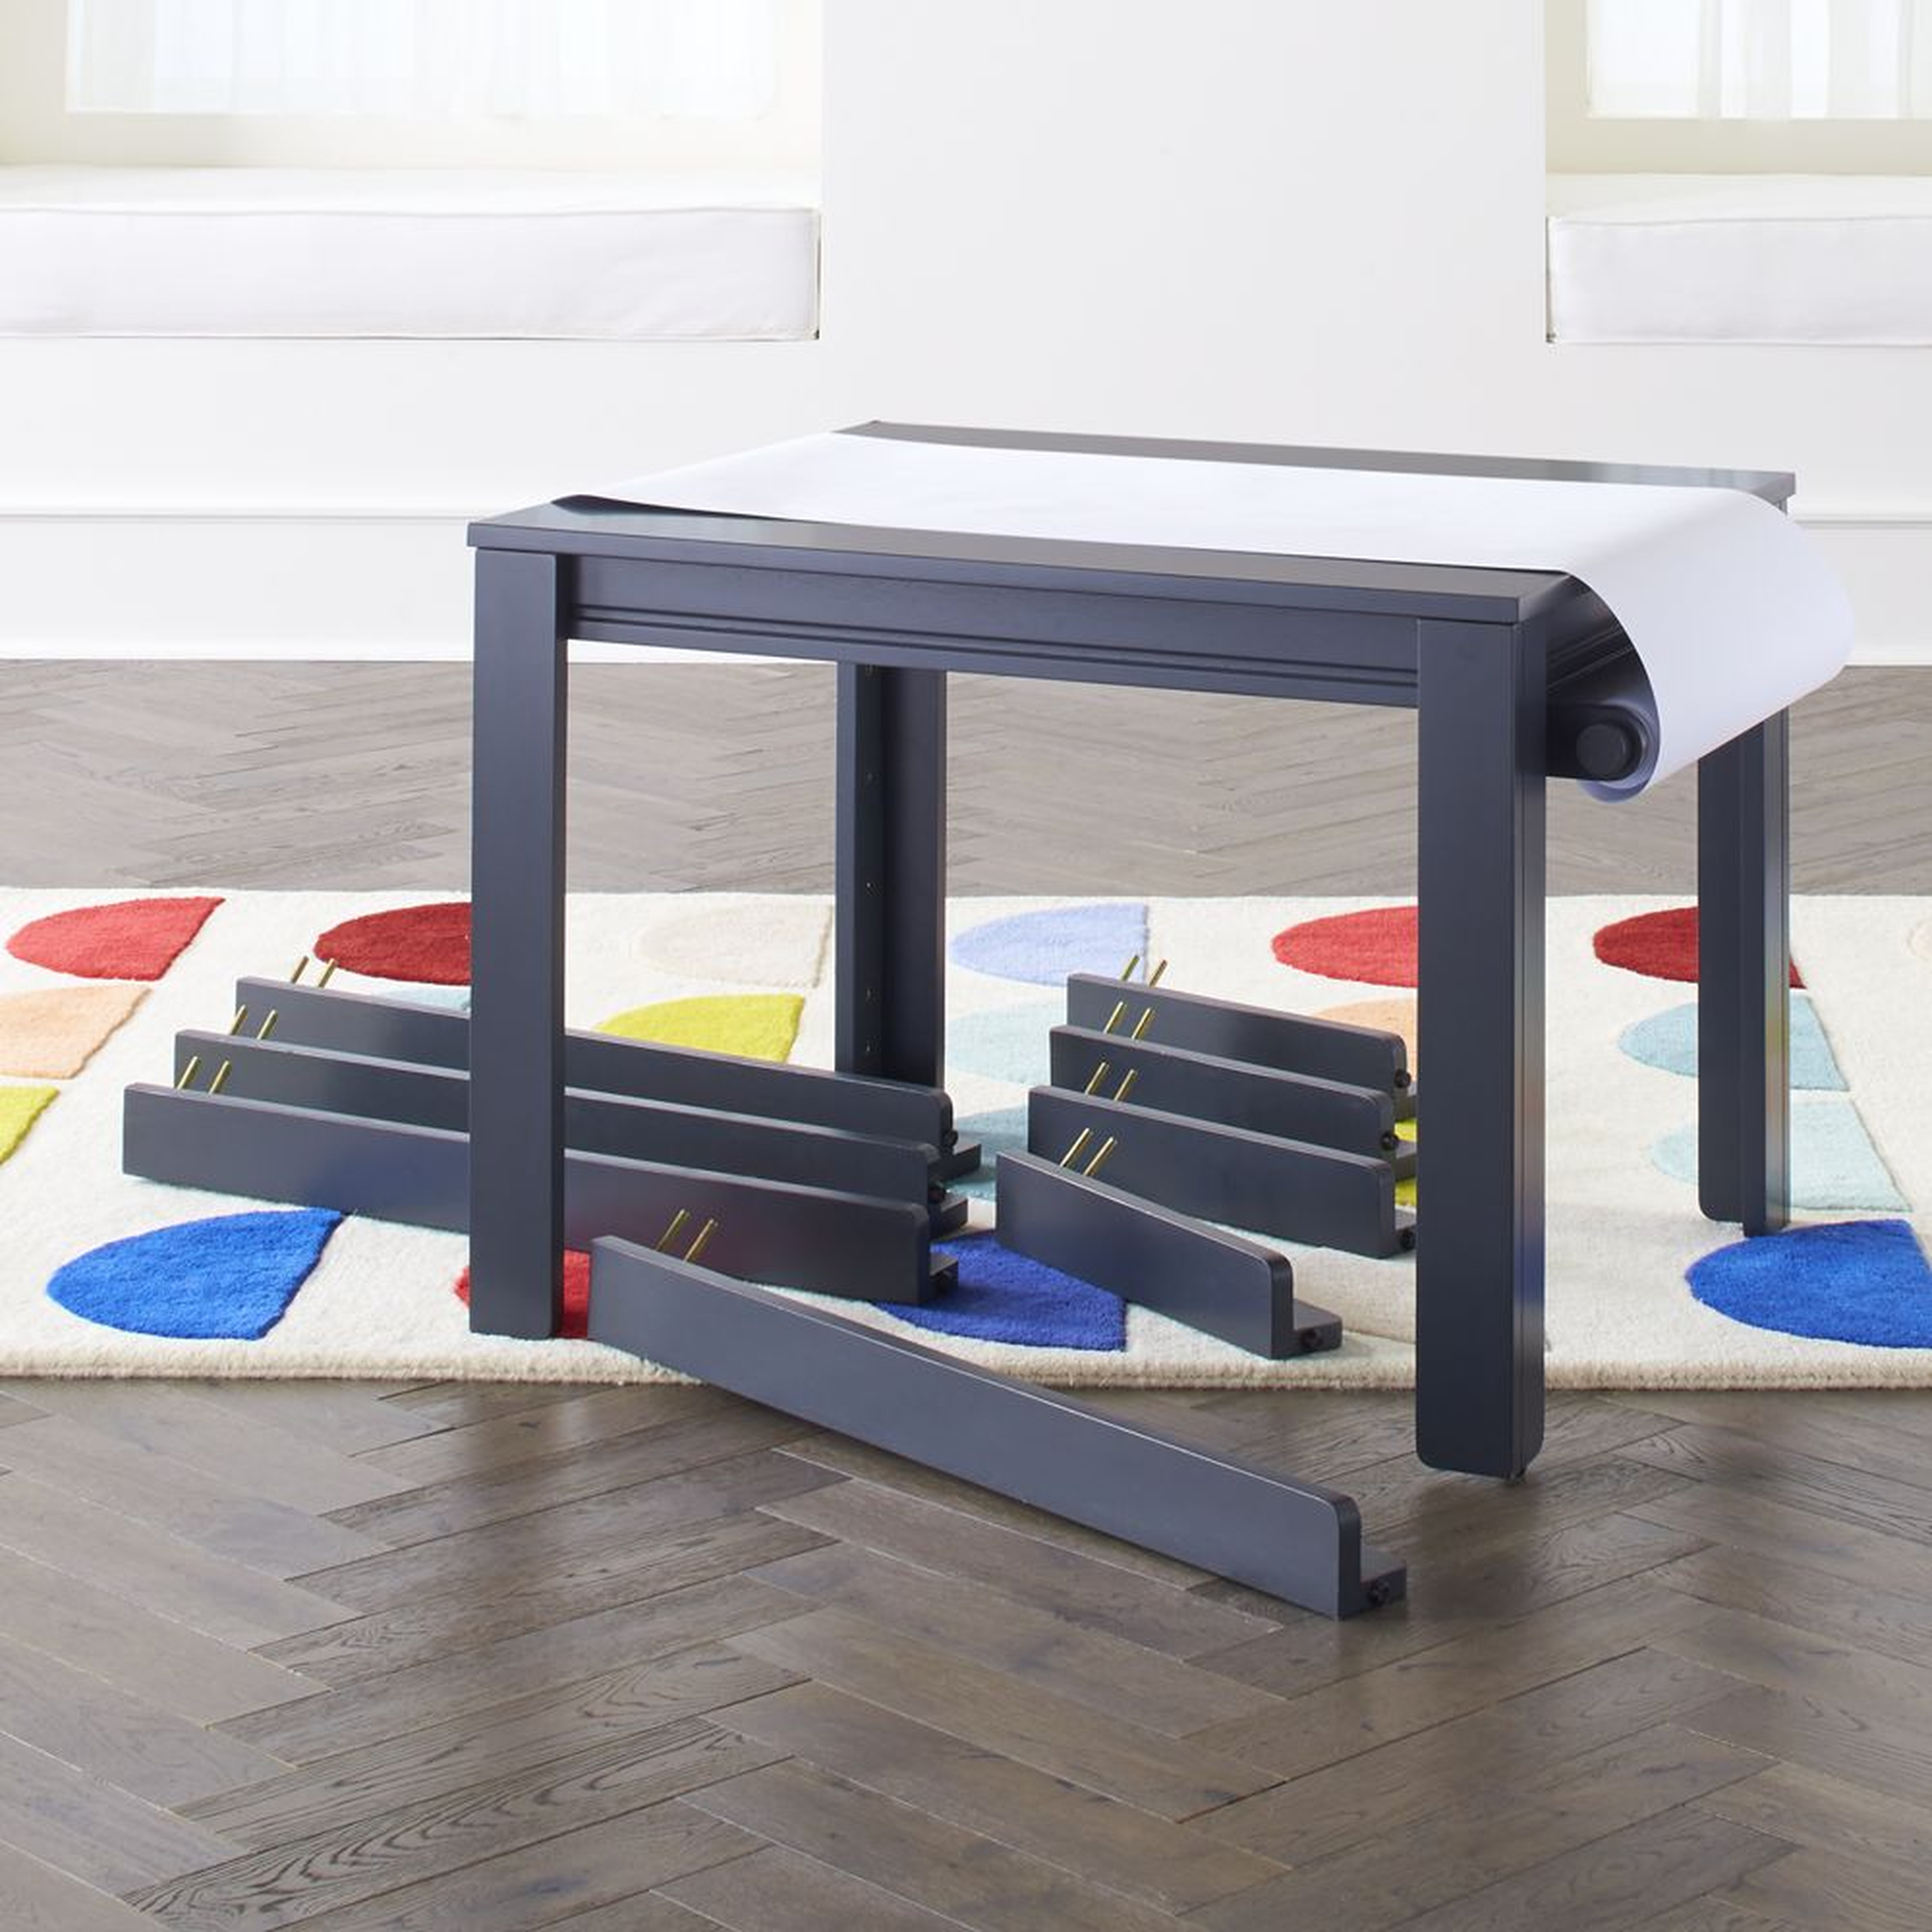 Small Charcoal Adjustable Kids Table, Leg Set and Paper Roll - Crate and Barrel